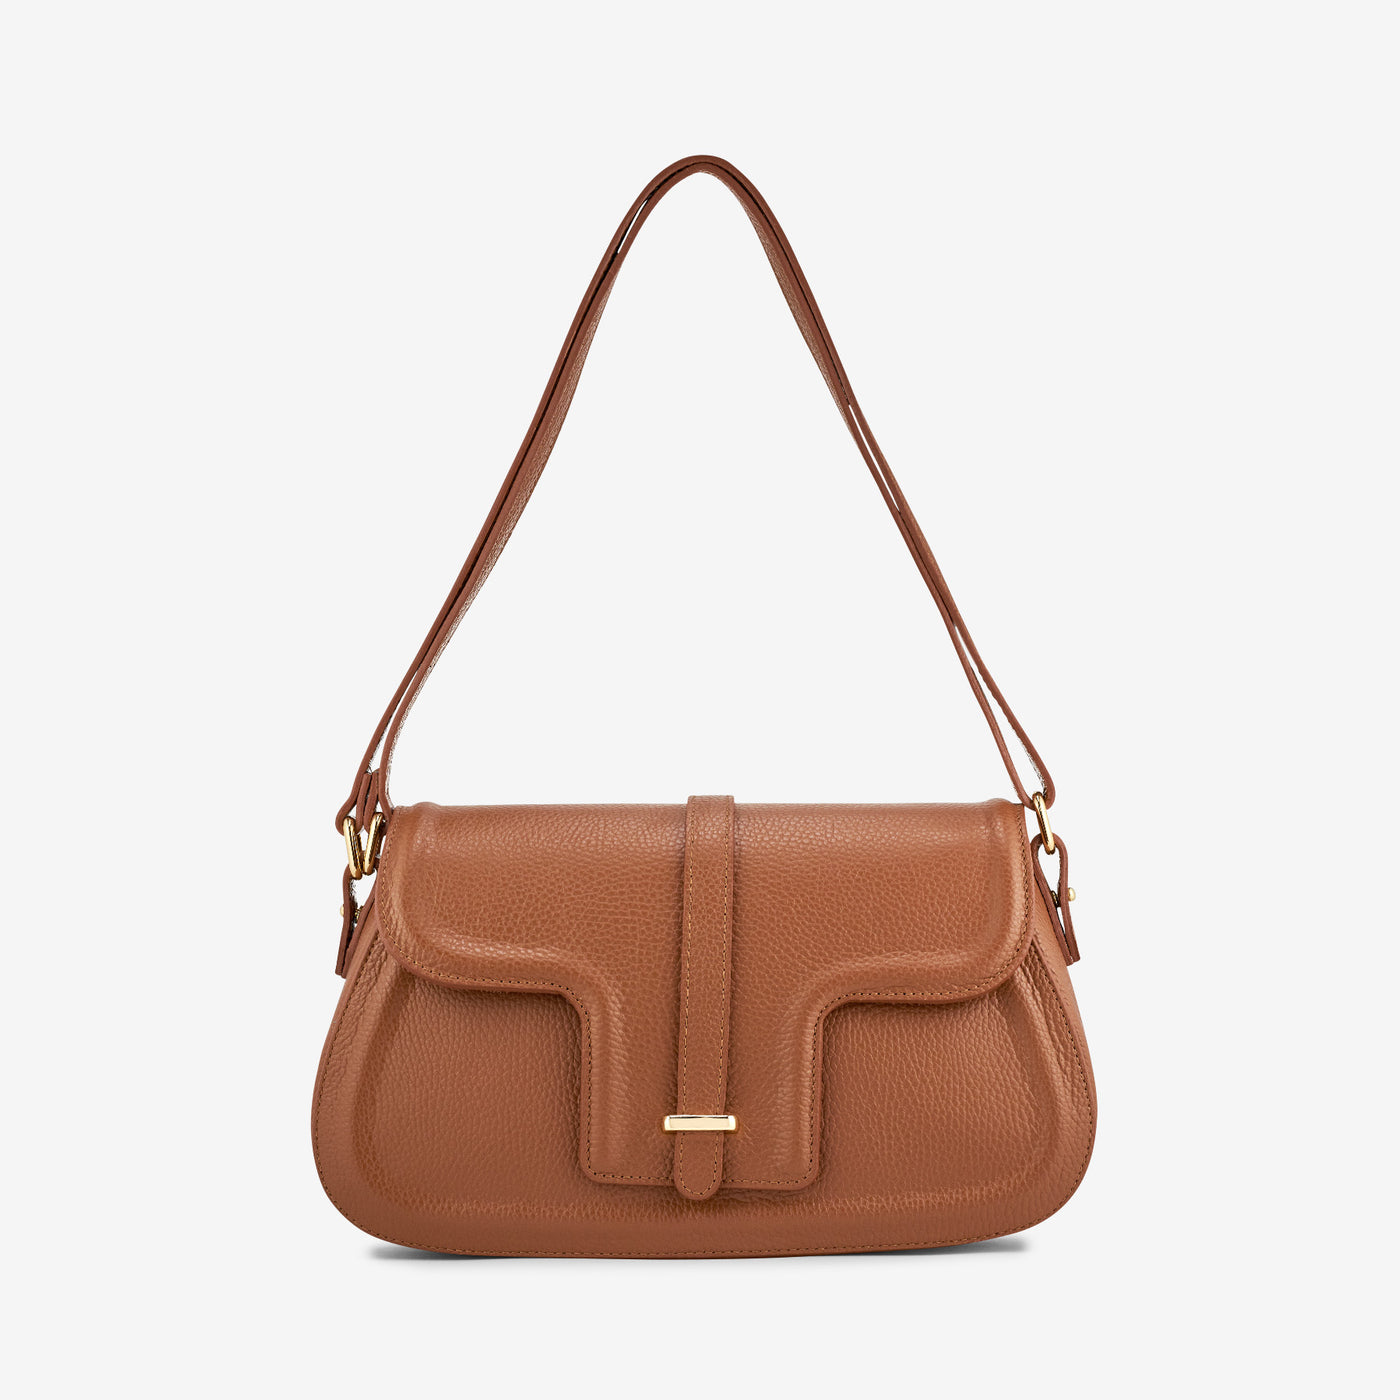 VIAVERDI Brown Tumbled Leather Shoulder Bag Made in Italy